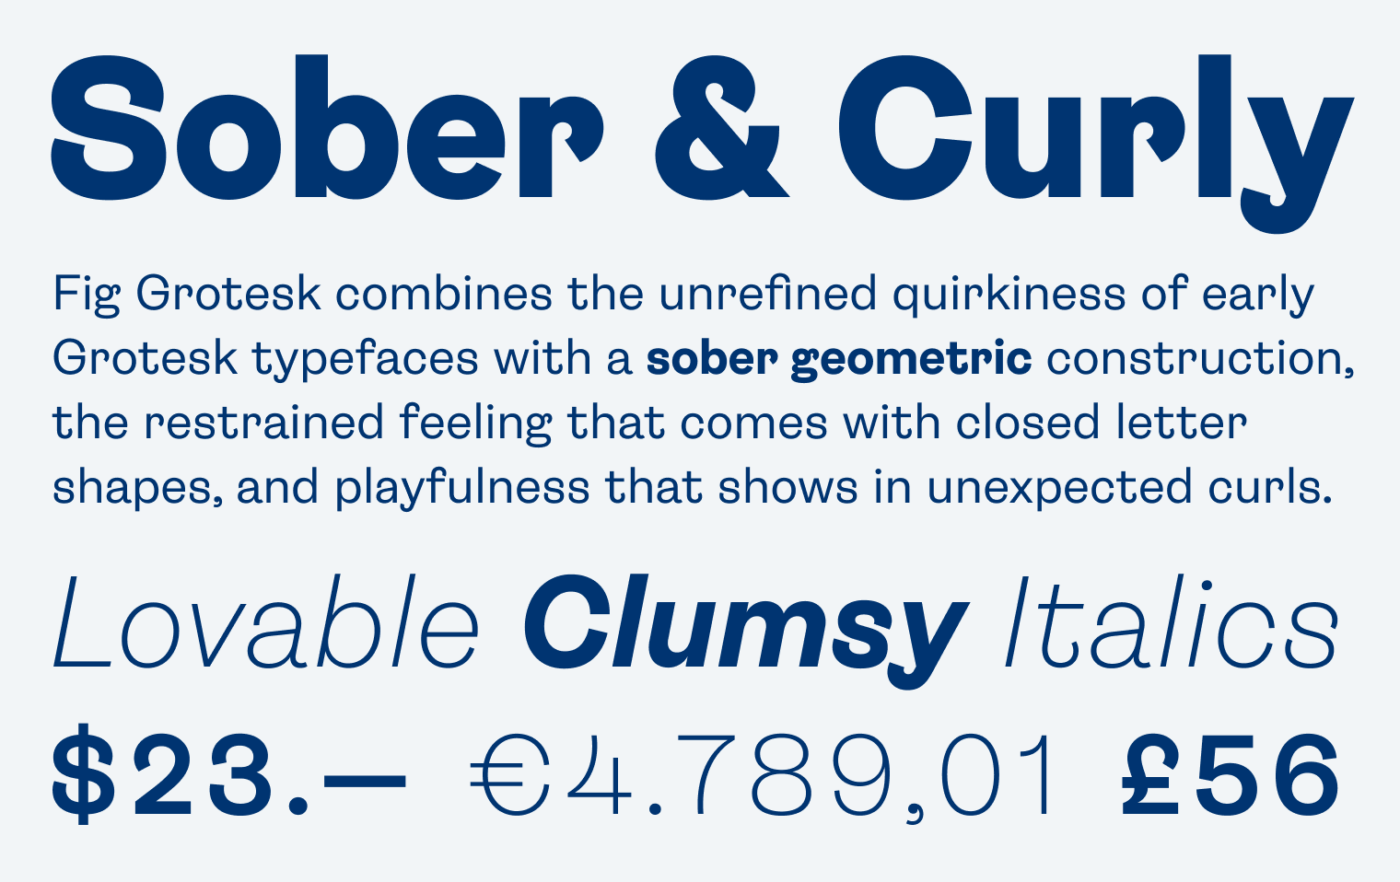 Sober & Curly
Fig Grotesk combines the unrefined quirkiness of early Grotesk typefaces with a sober geometric construction, the restrained feeling that comes with closed letter shapes, and playfulness that shows in unexpected curls.
Lovable Clumsy Italics
$23.- €4.789,01 £56